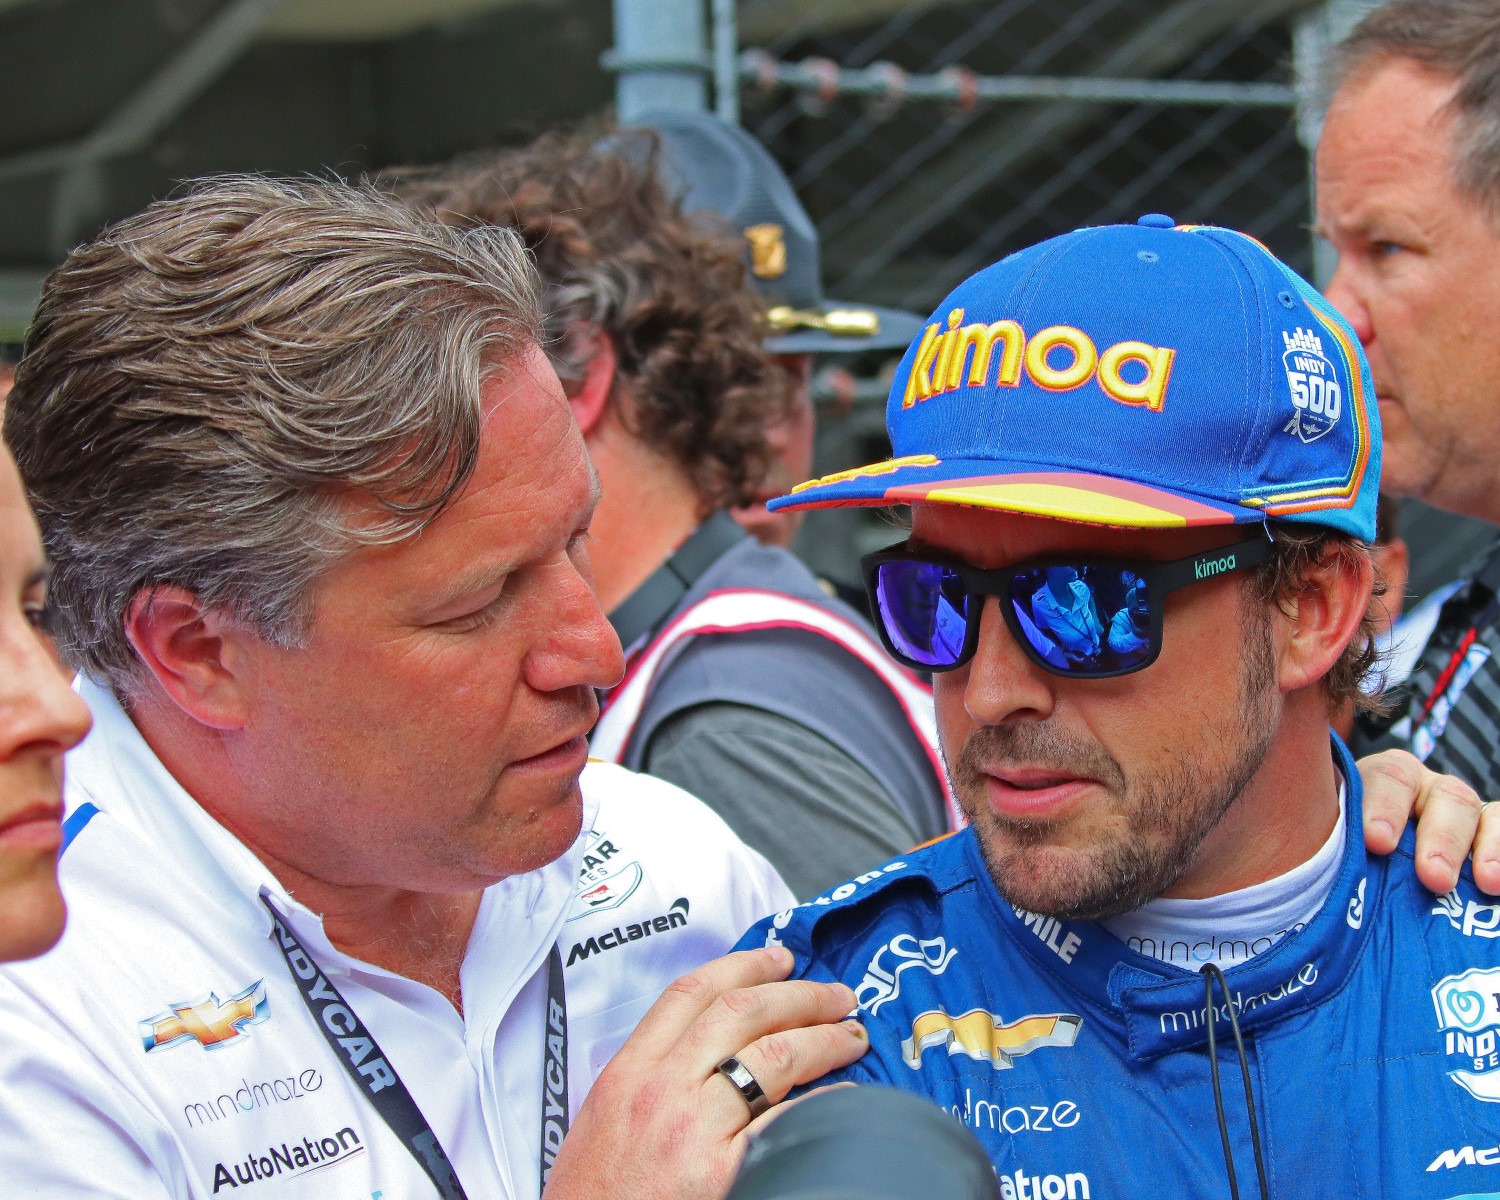 Fernando Alonso is done with the loser McLaren team